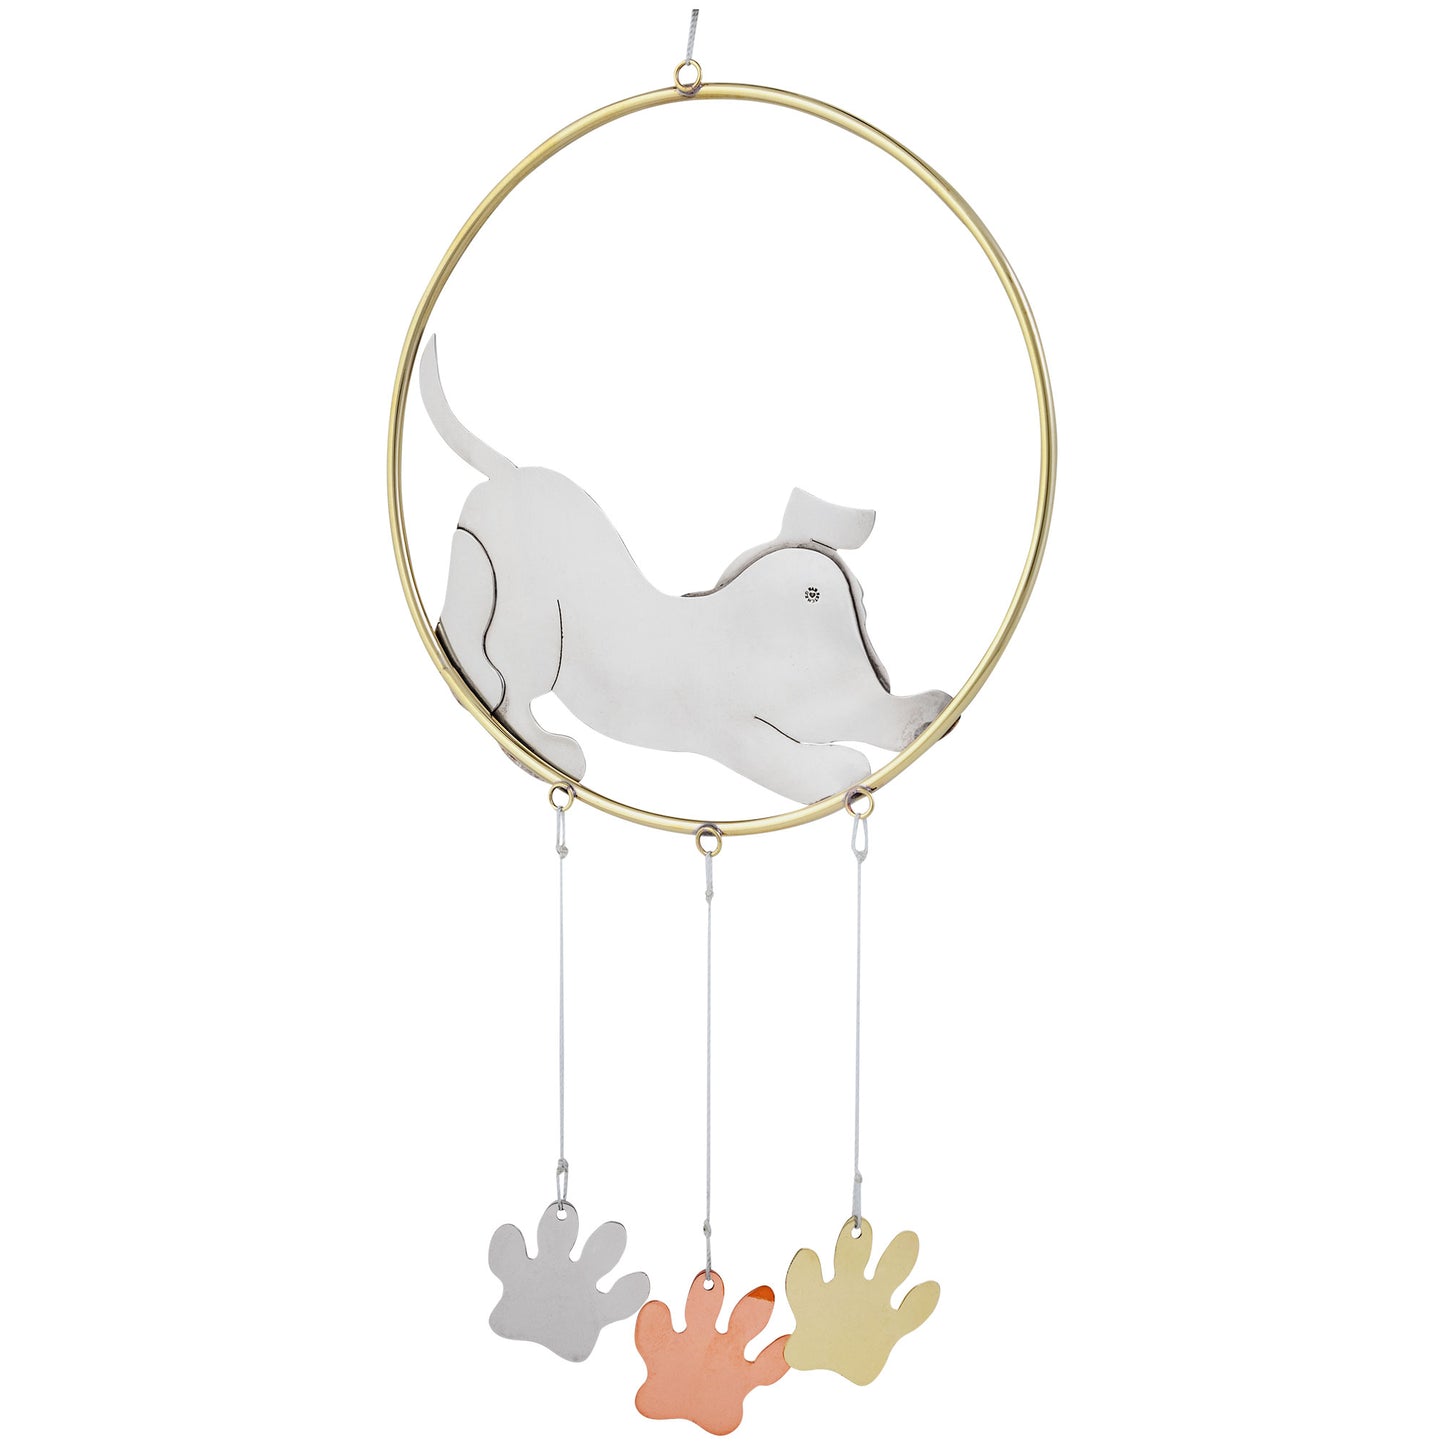 Playful Pet Mixed Metal Wind Chime